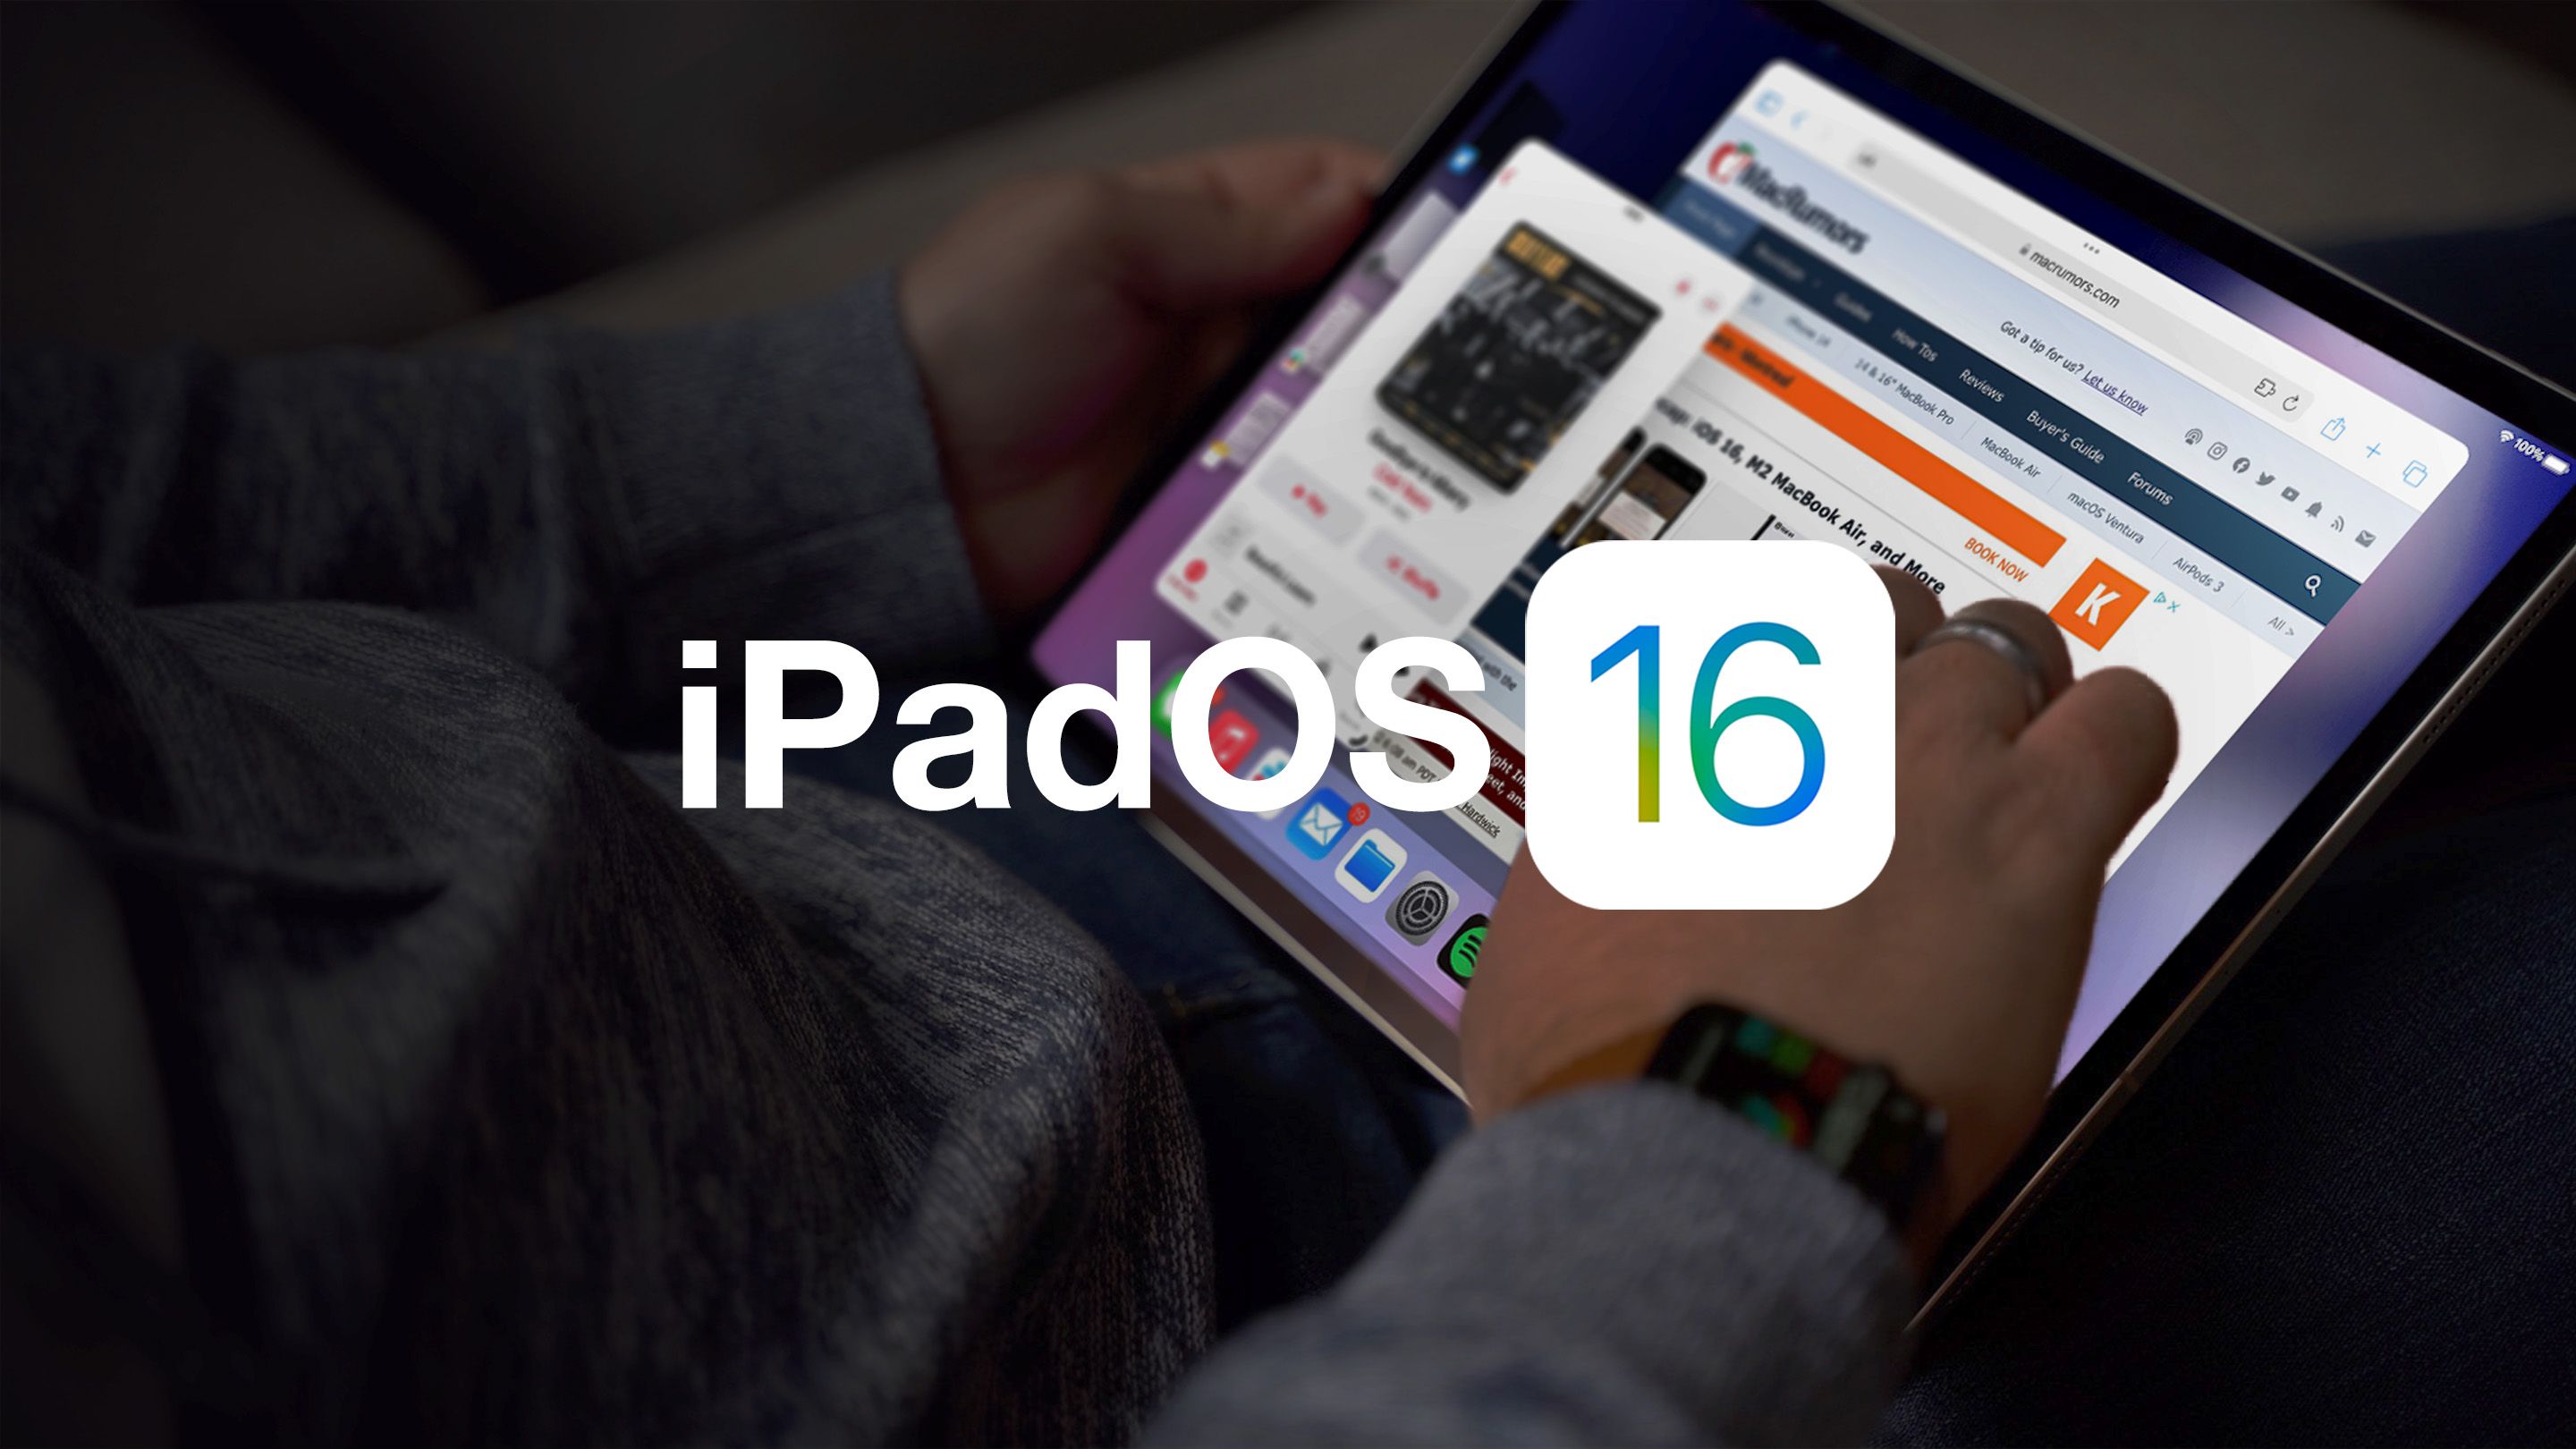 Apple Releases iPadOS 16 With Stage Manager, Weather App, Desktop Class Apps and..